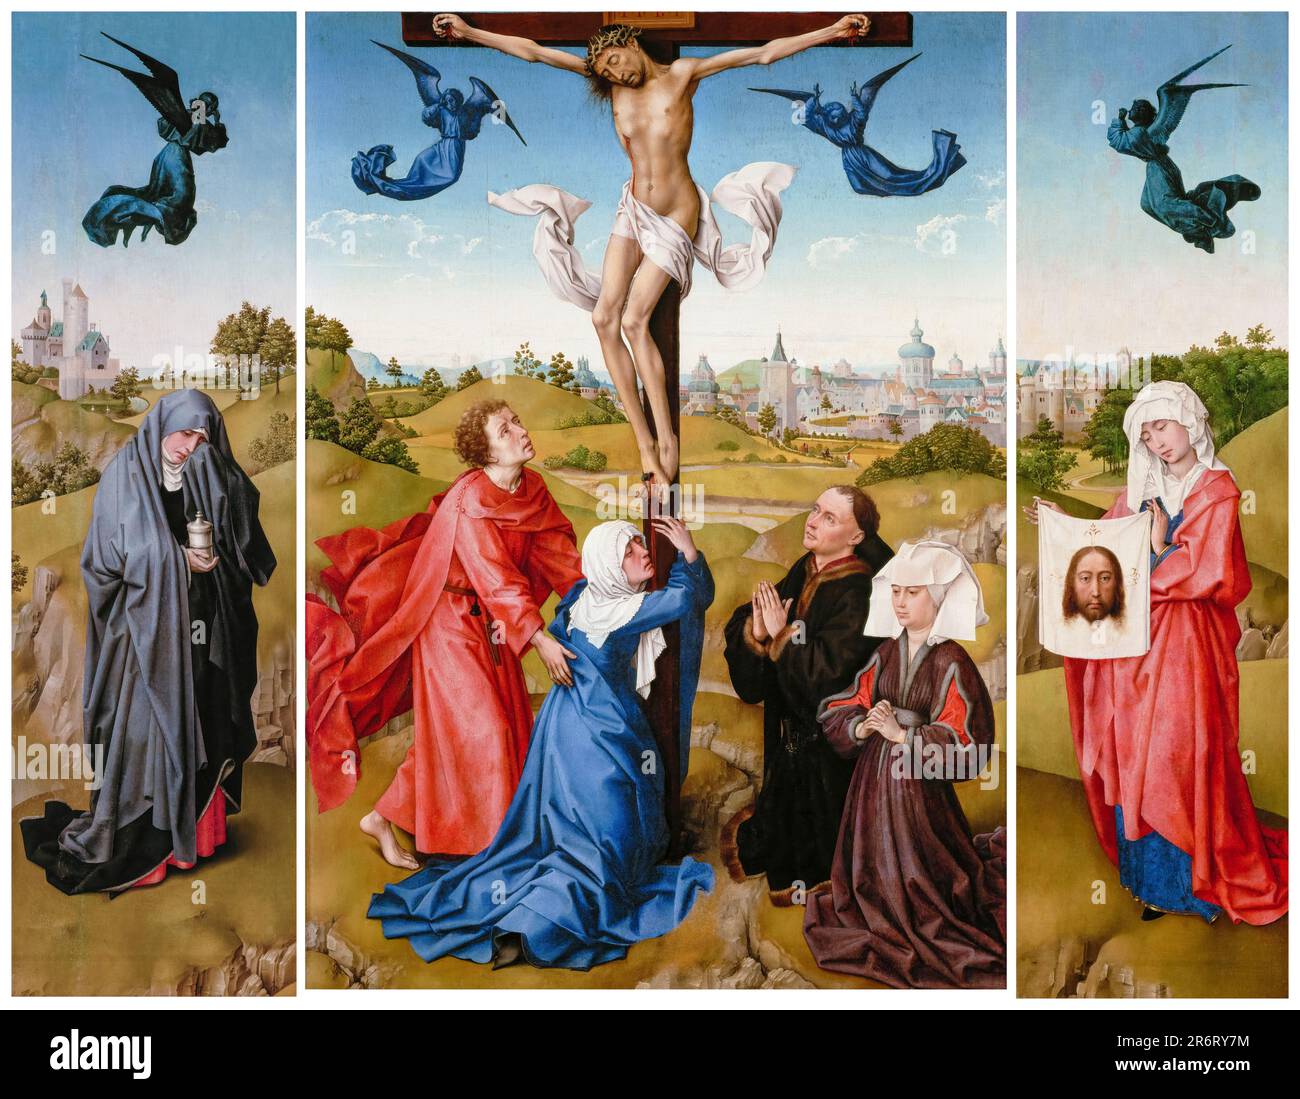 Rogier van der Weyden, Triptych: The Crucifixion, painting in oil on wood, 1443-1445 Stock Photo